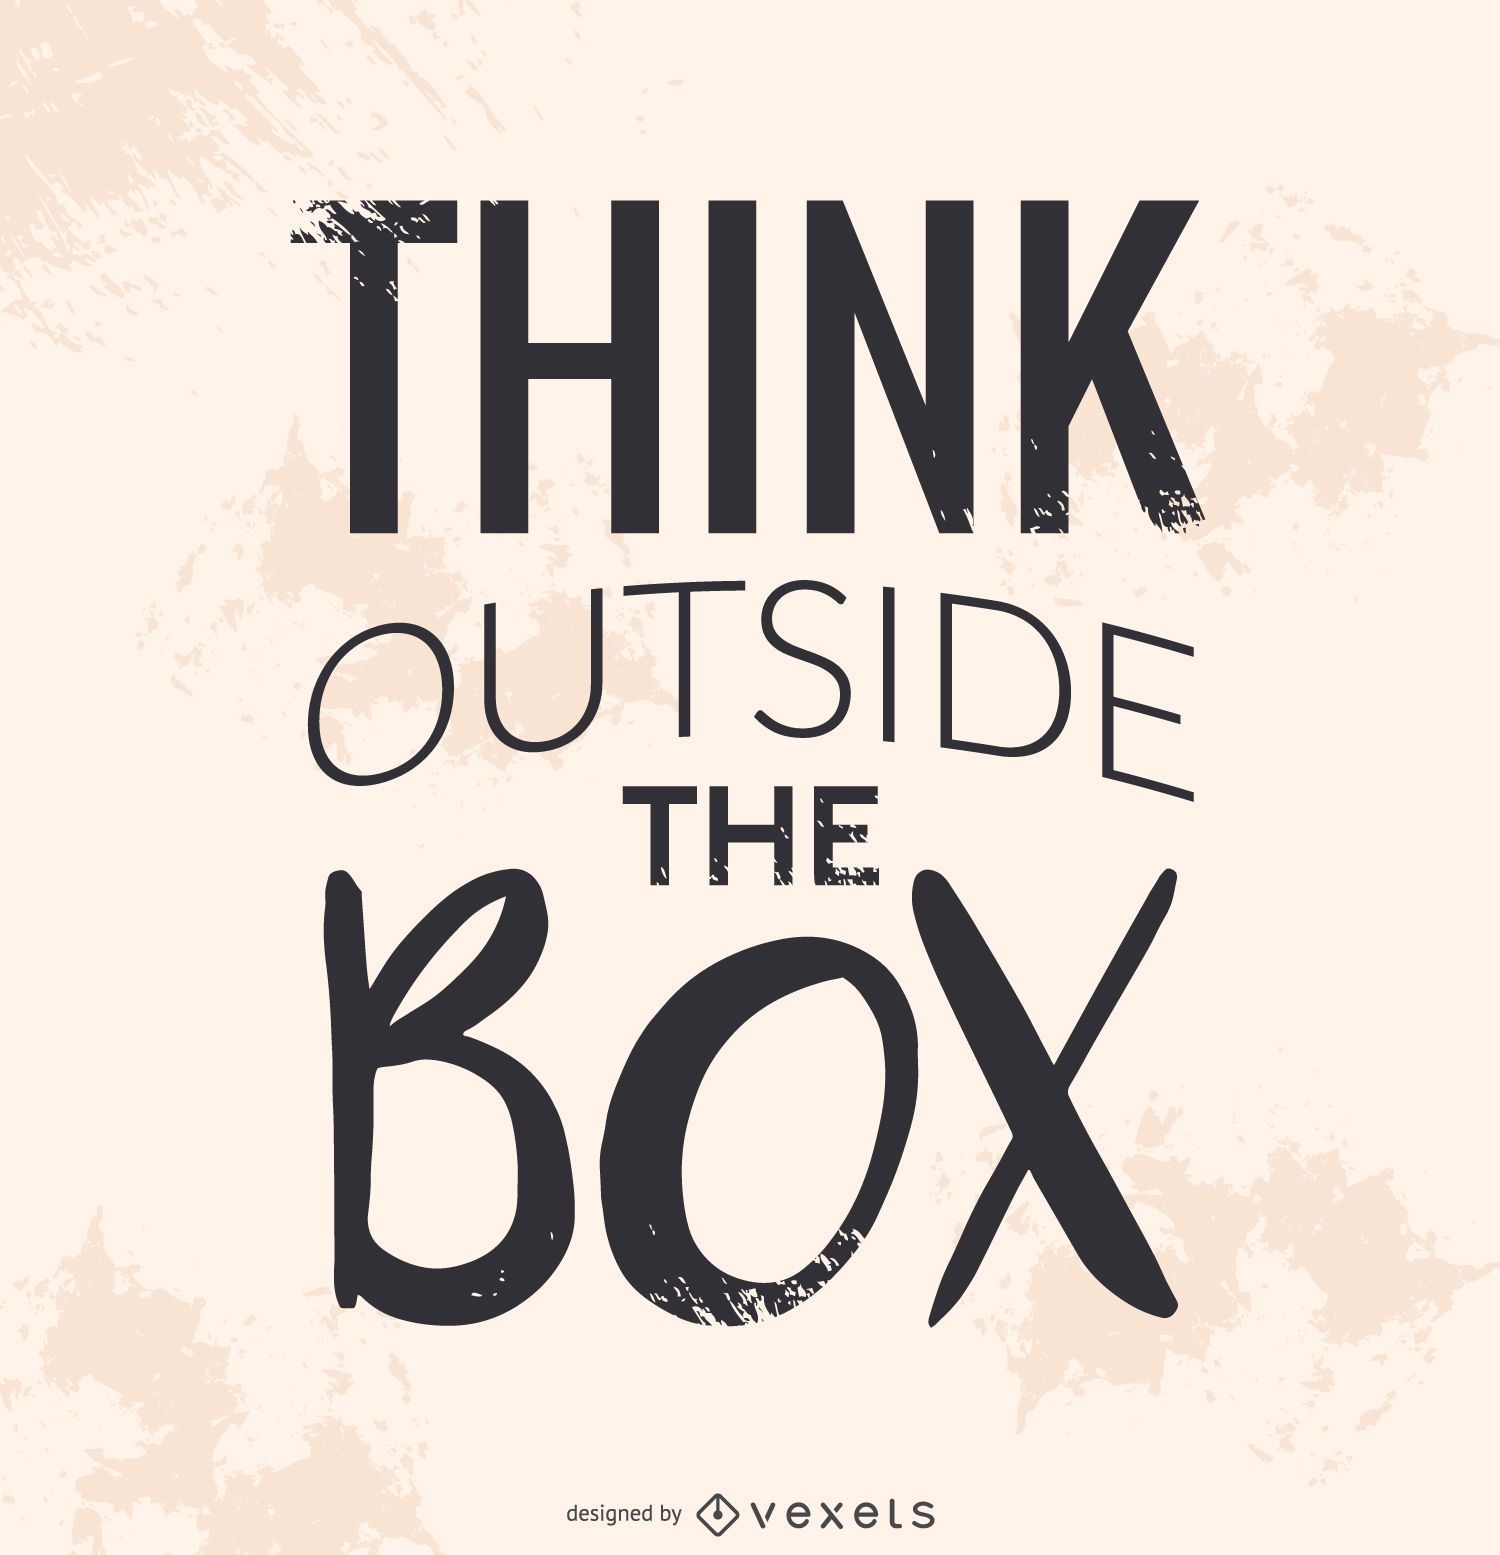 Think outside the box quote